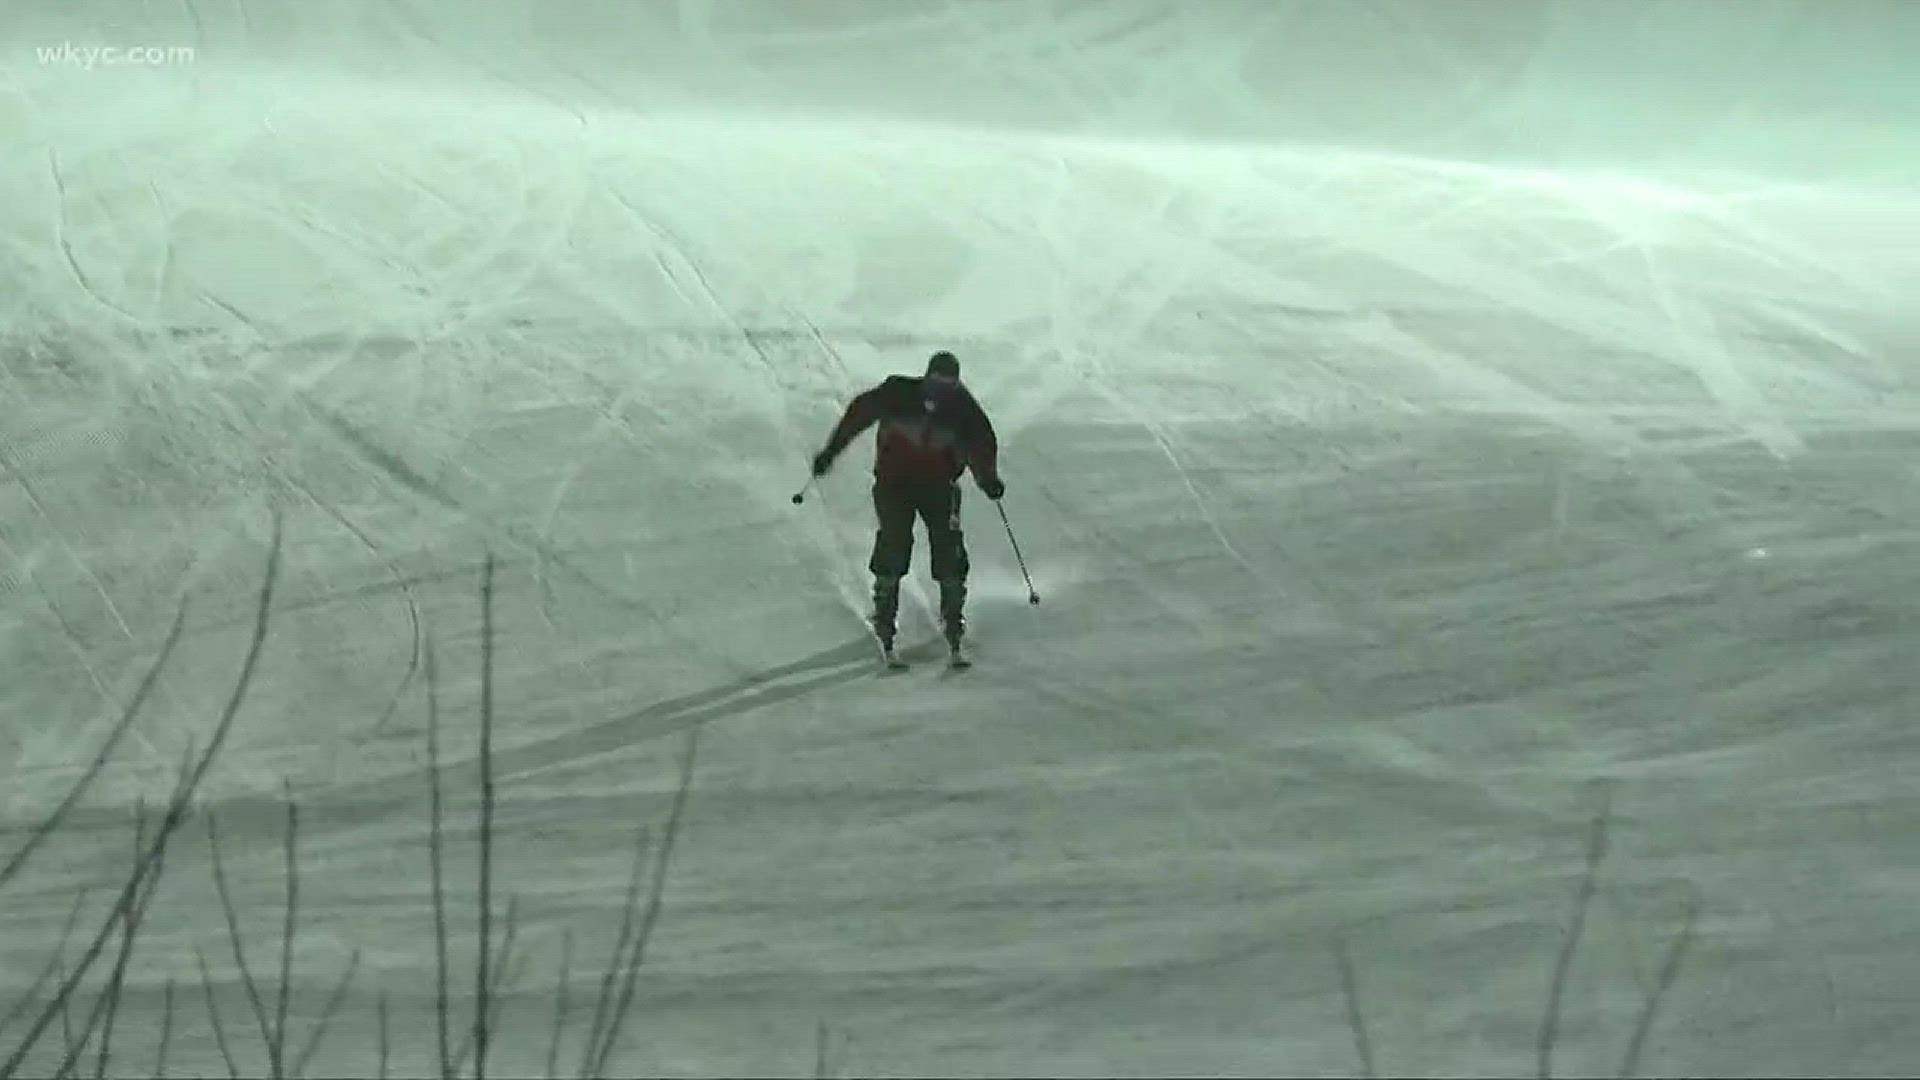 Don't call them crazy! Freezing temps don't scare skiers away